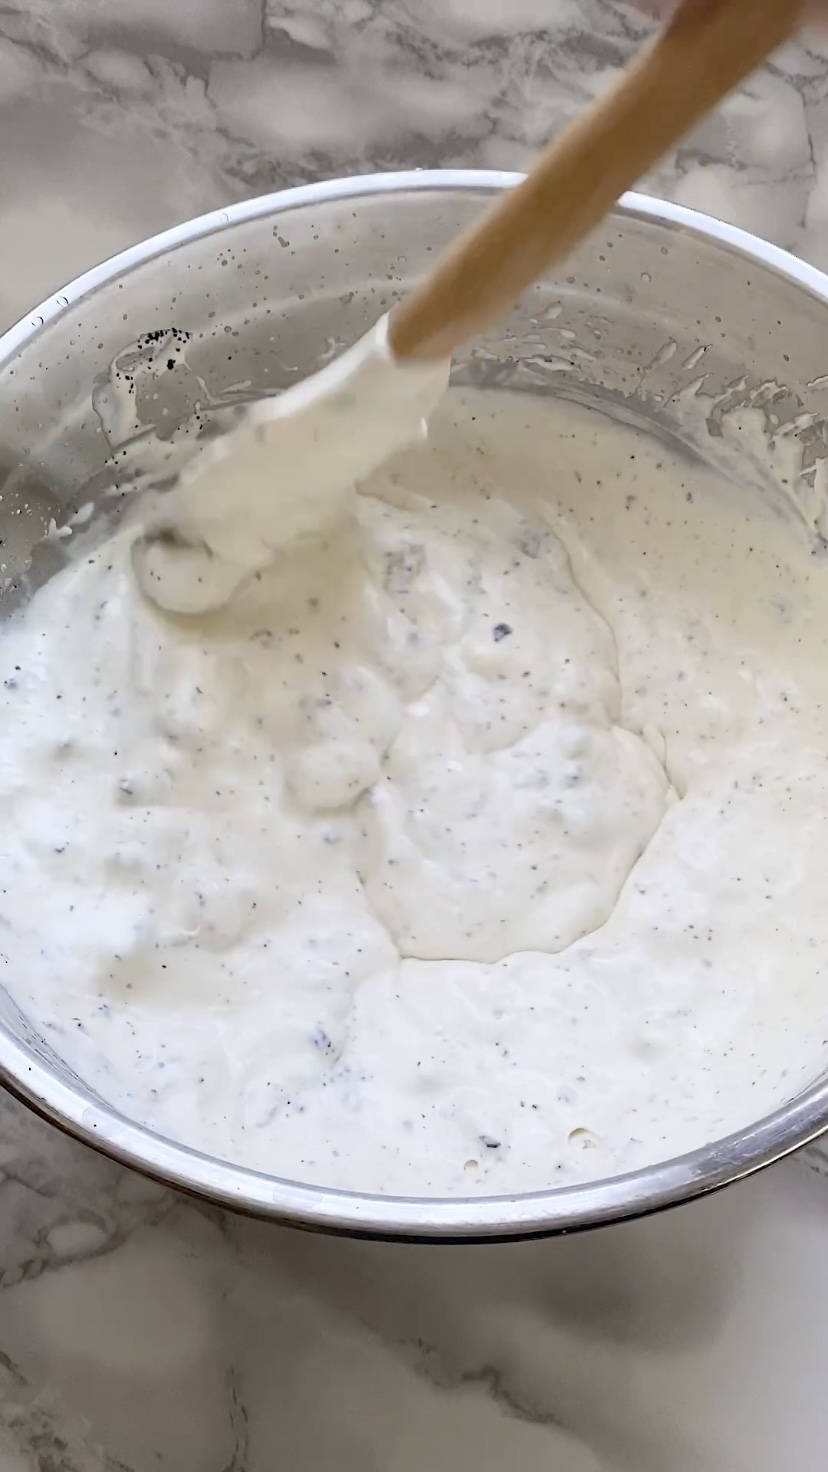 Folding cookies into whipped cream.